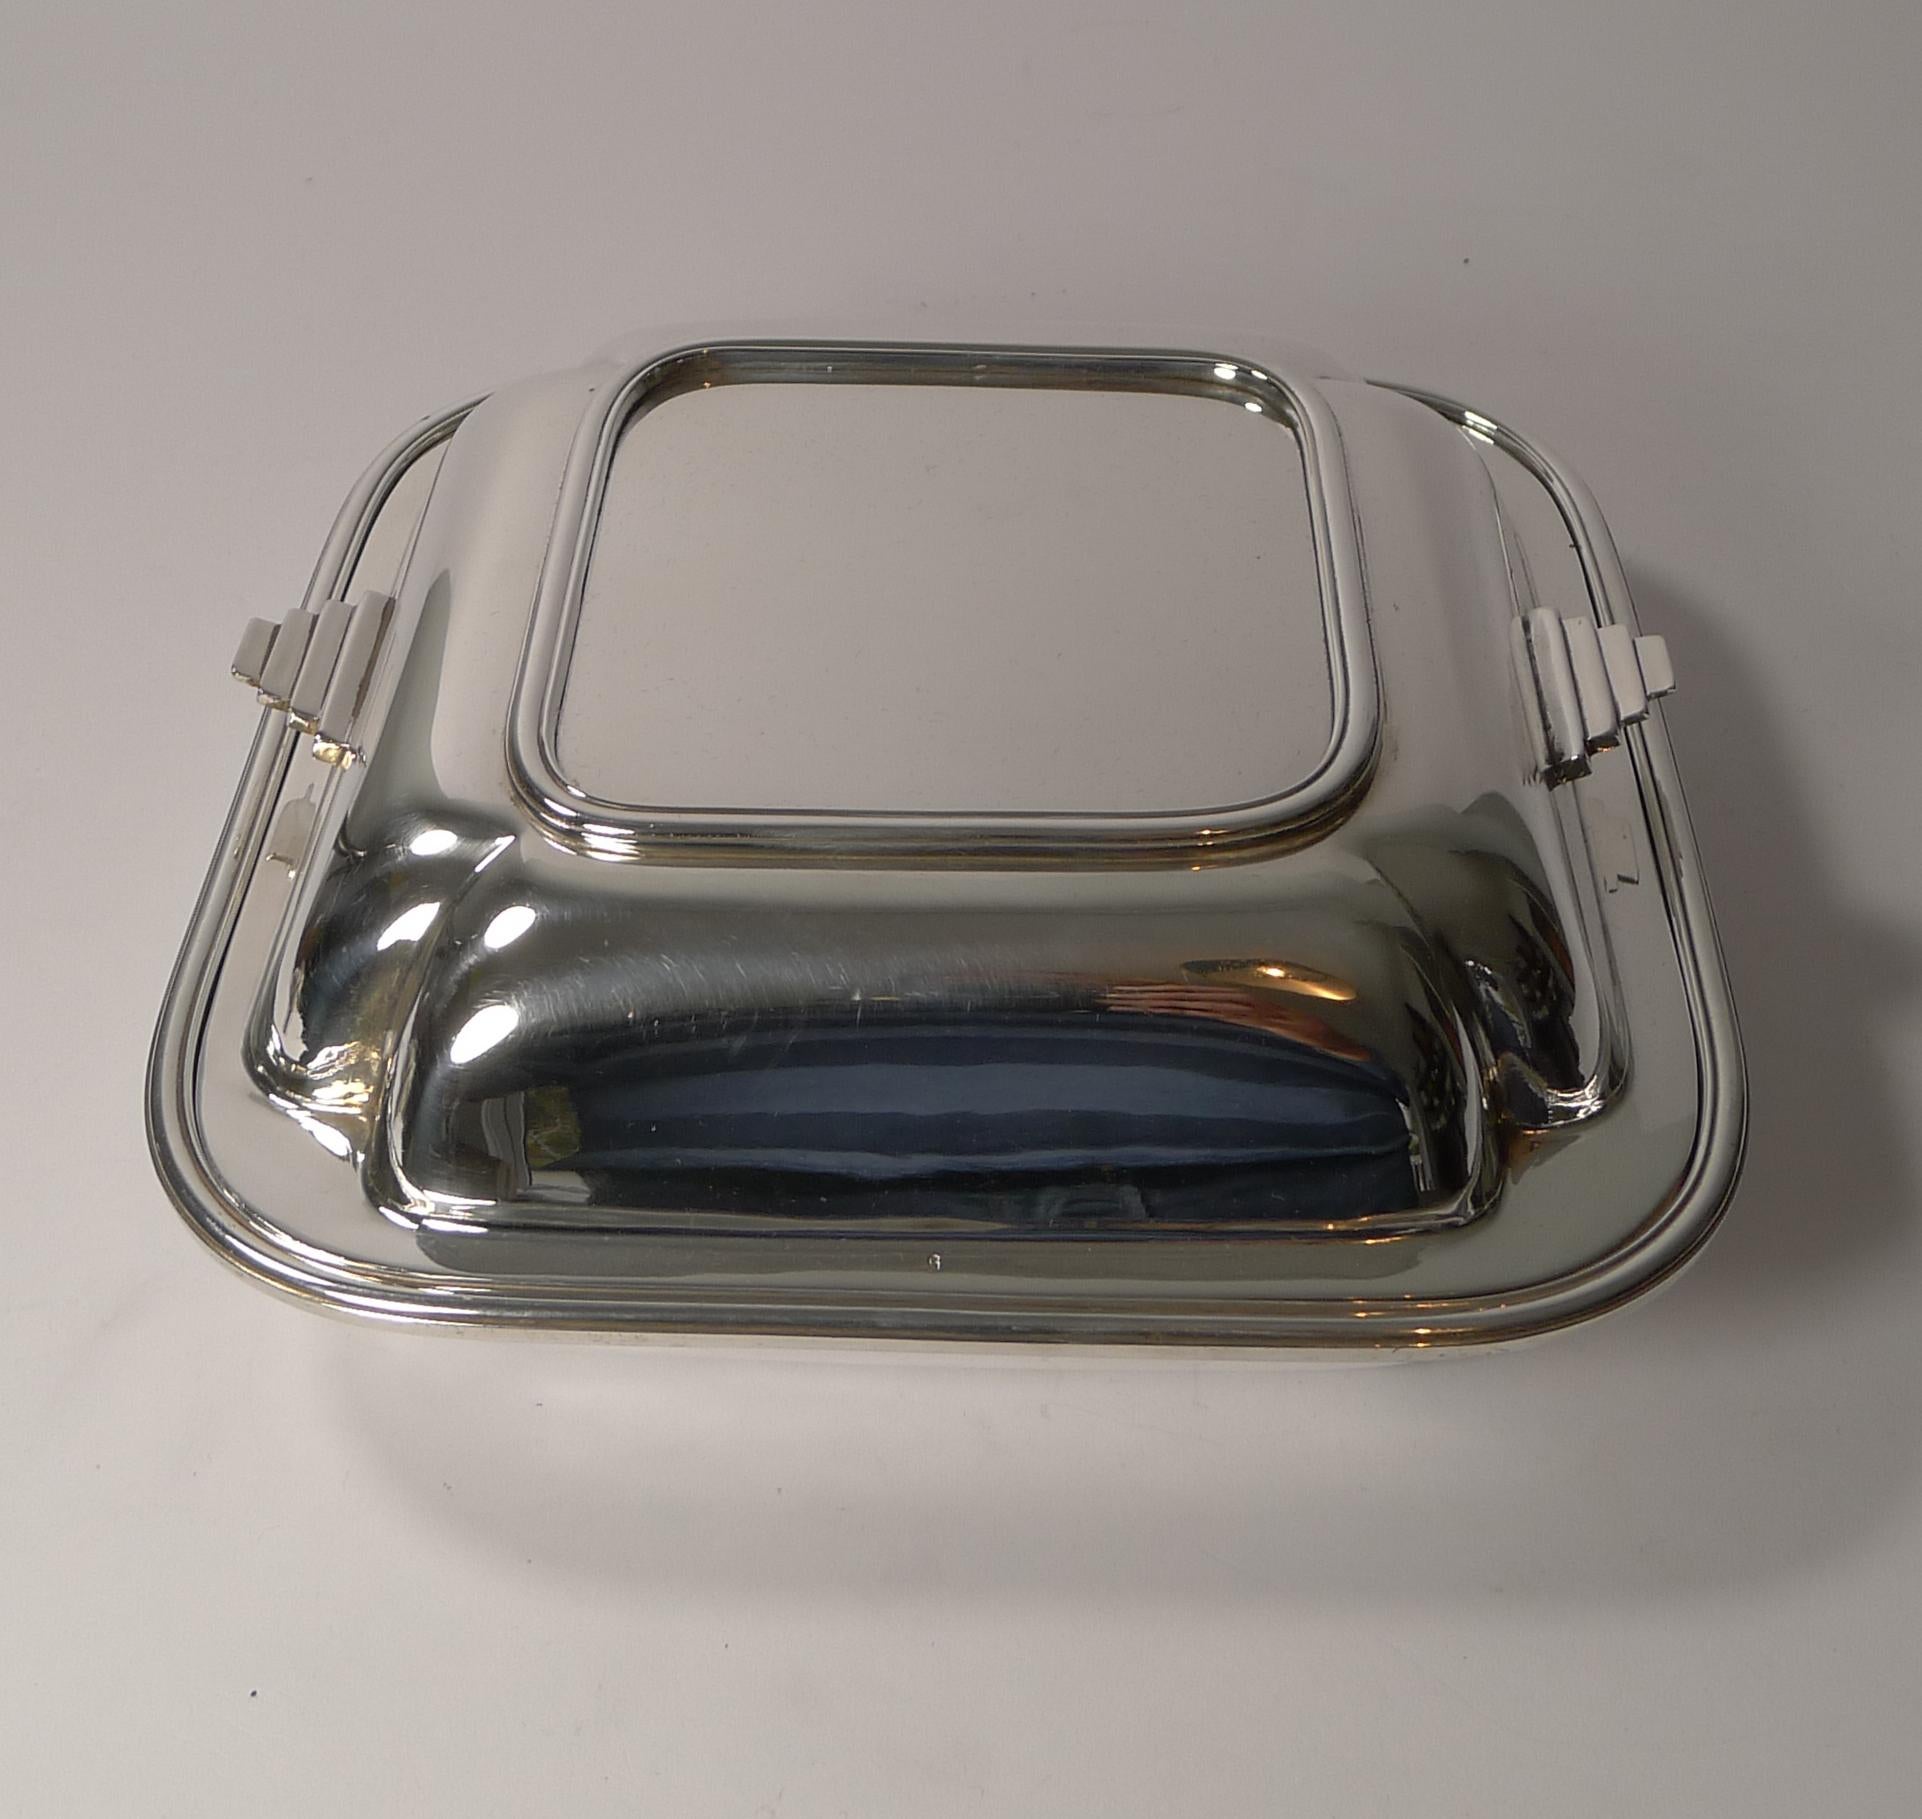 Smart English Art Deco Entree Dish, Silver Plated by W & G Sissons, circa 1930 4